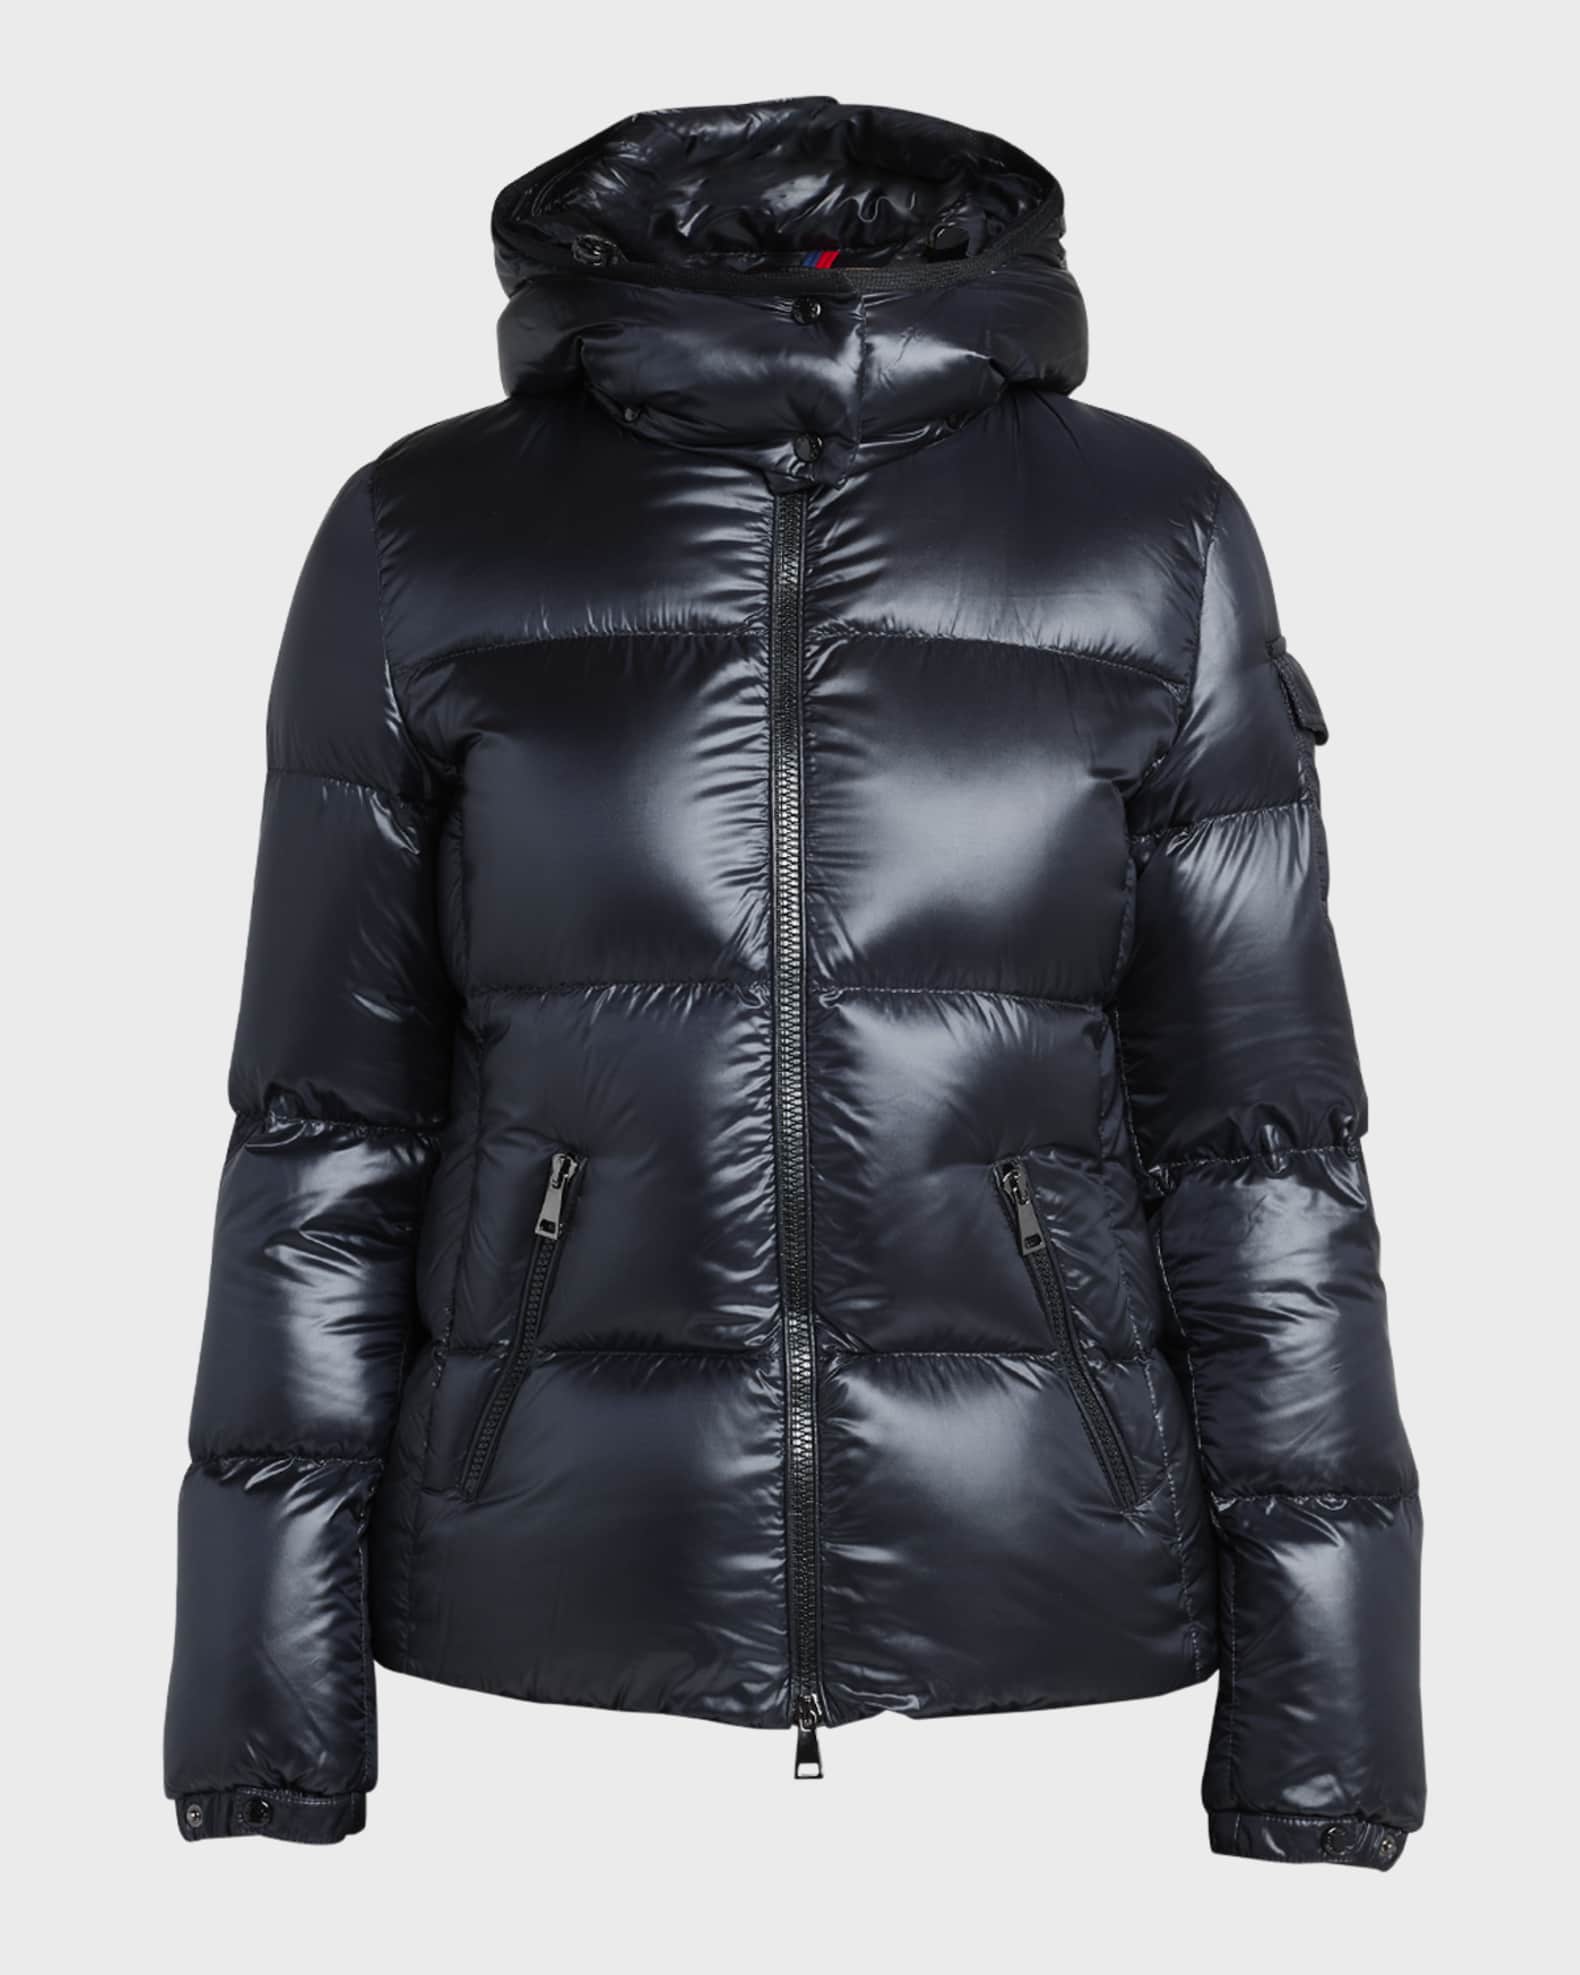 Moncler Fourmine Puffer Jacket with Removable Hood | Neiman Marcus